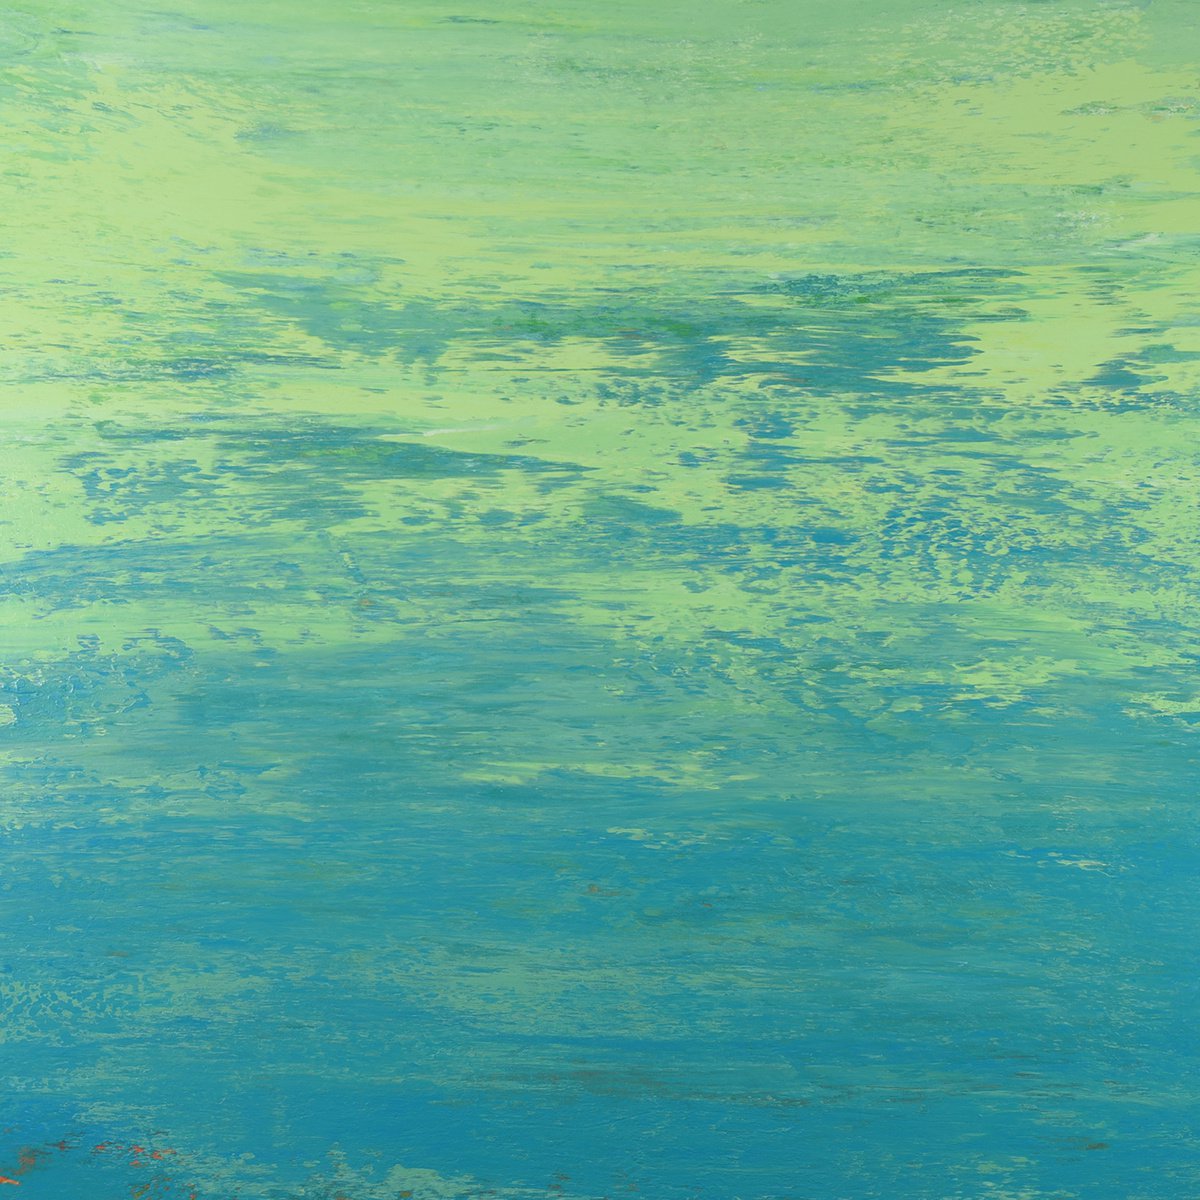 Glistening Water - Modern Abstract Expressionist Seascape by Suzanne Vaughan